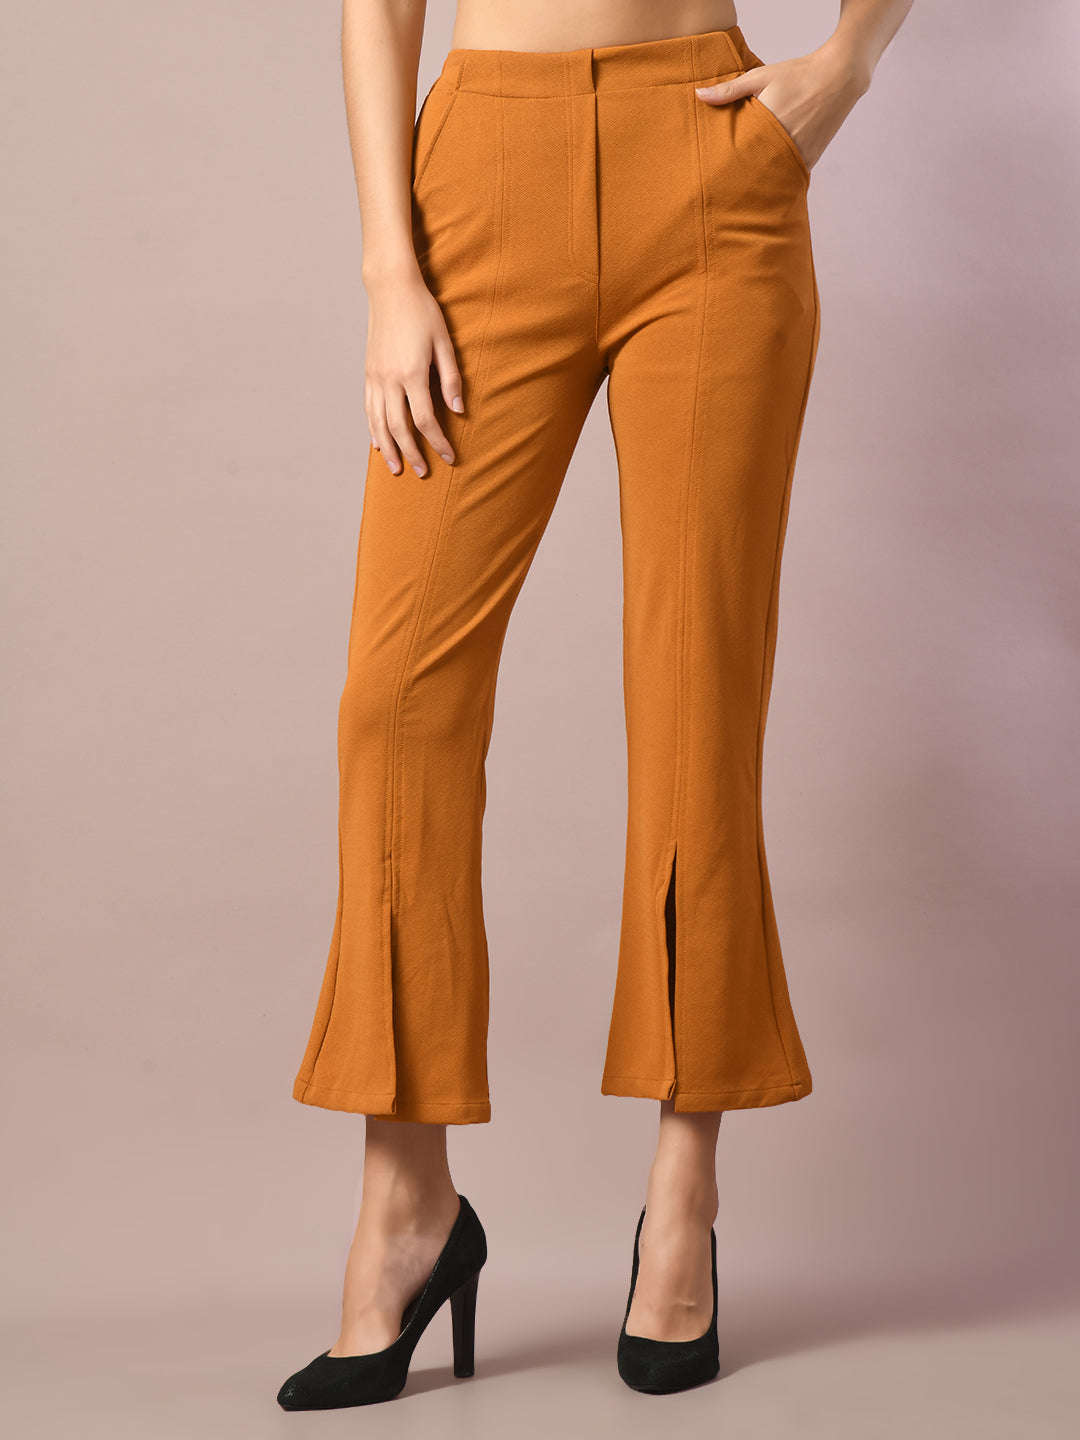 Women's  Mustard Solid Boat Neck Party Top With Trousers Co-Ord Set  - Myshka